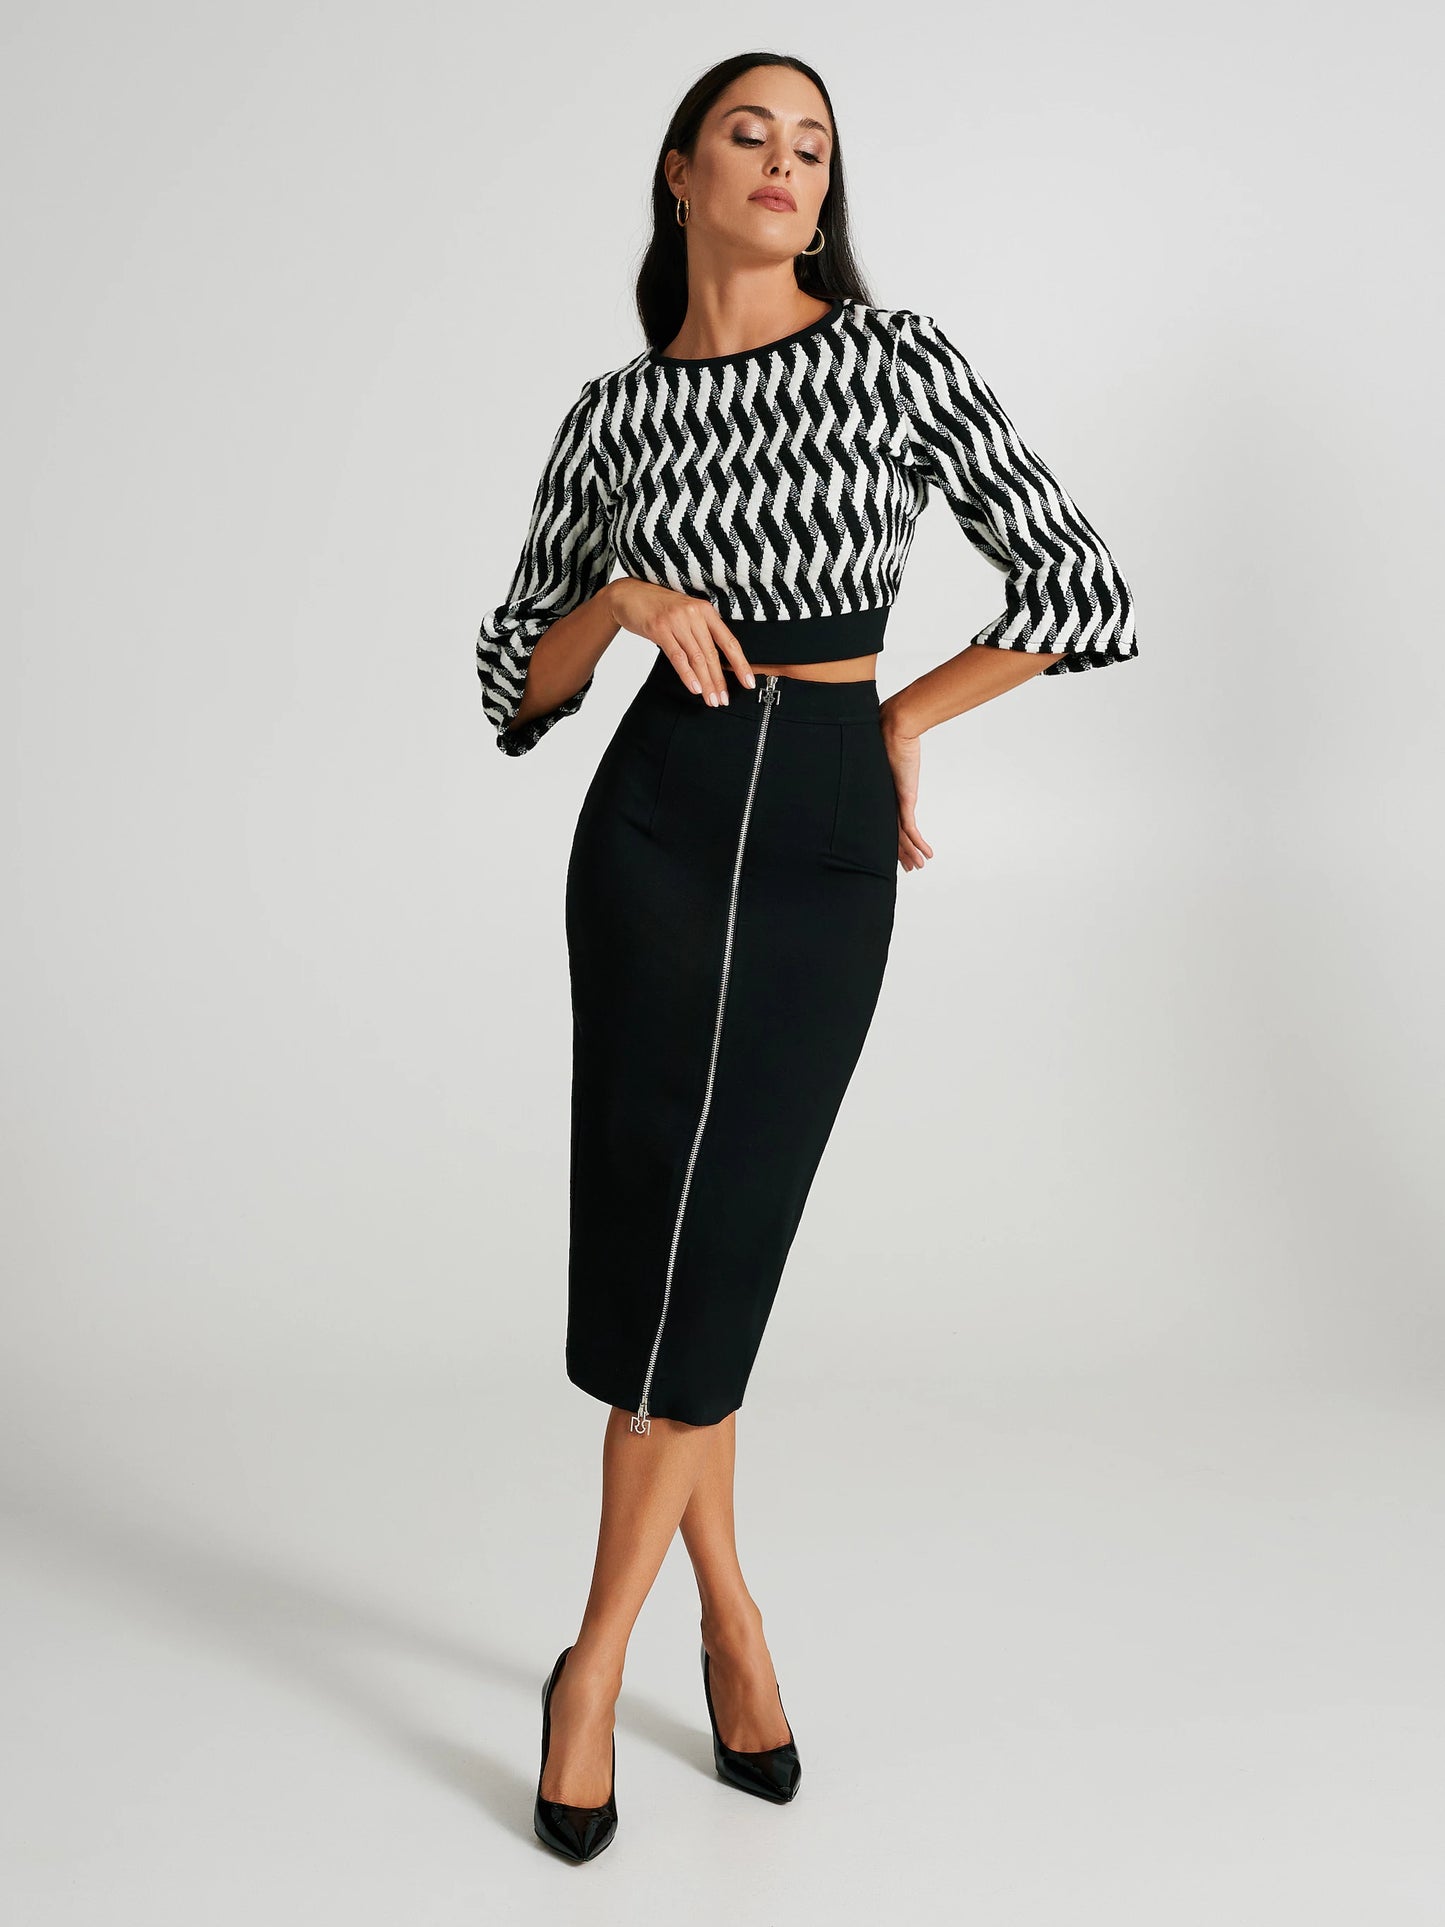 Pencil skirt with zip